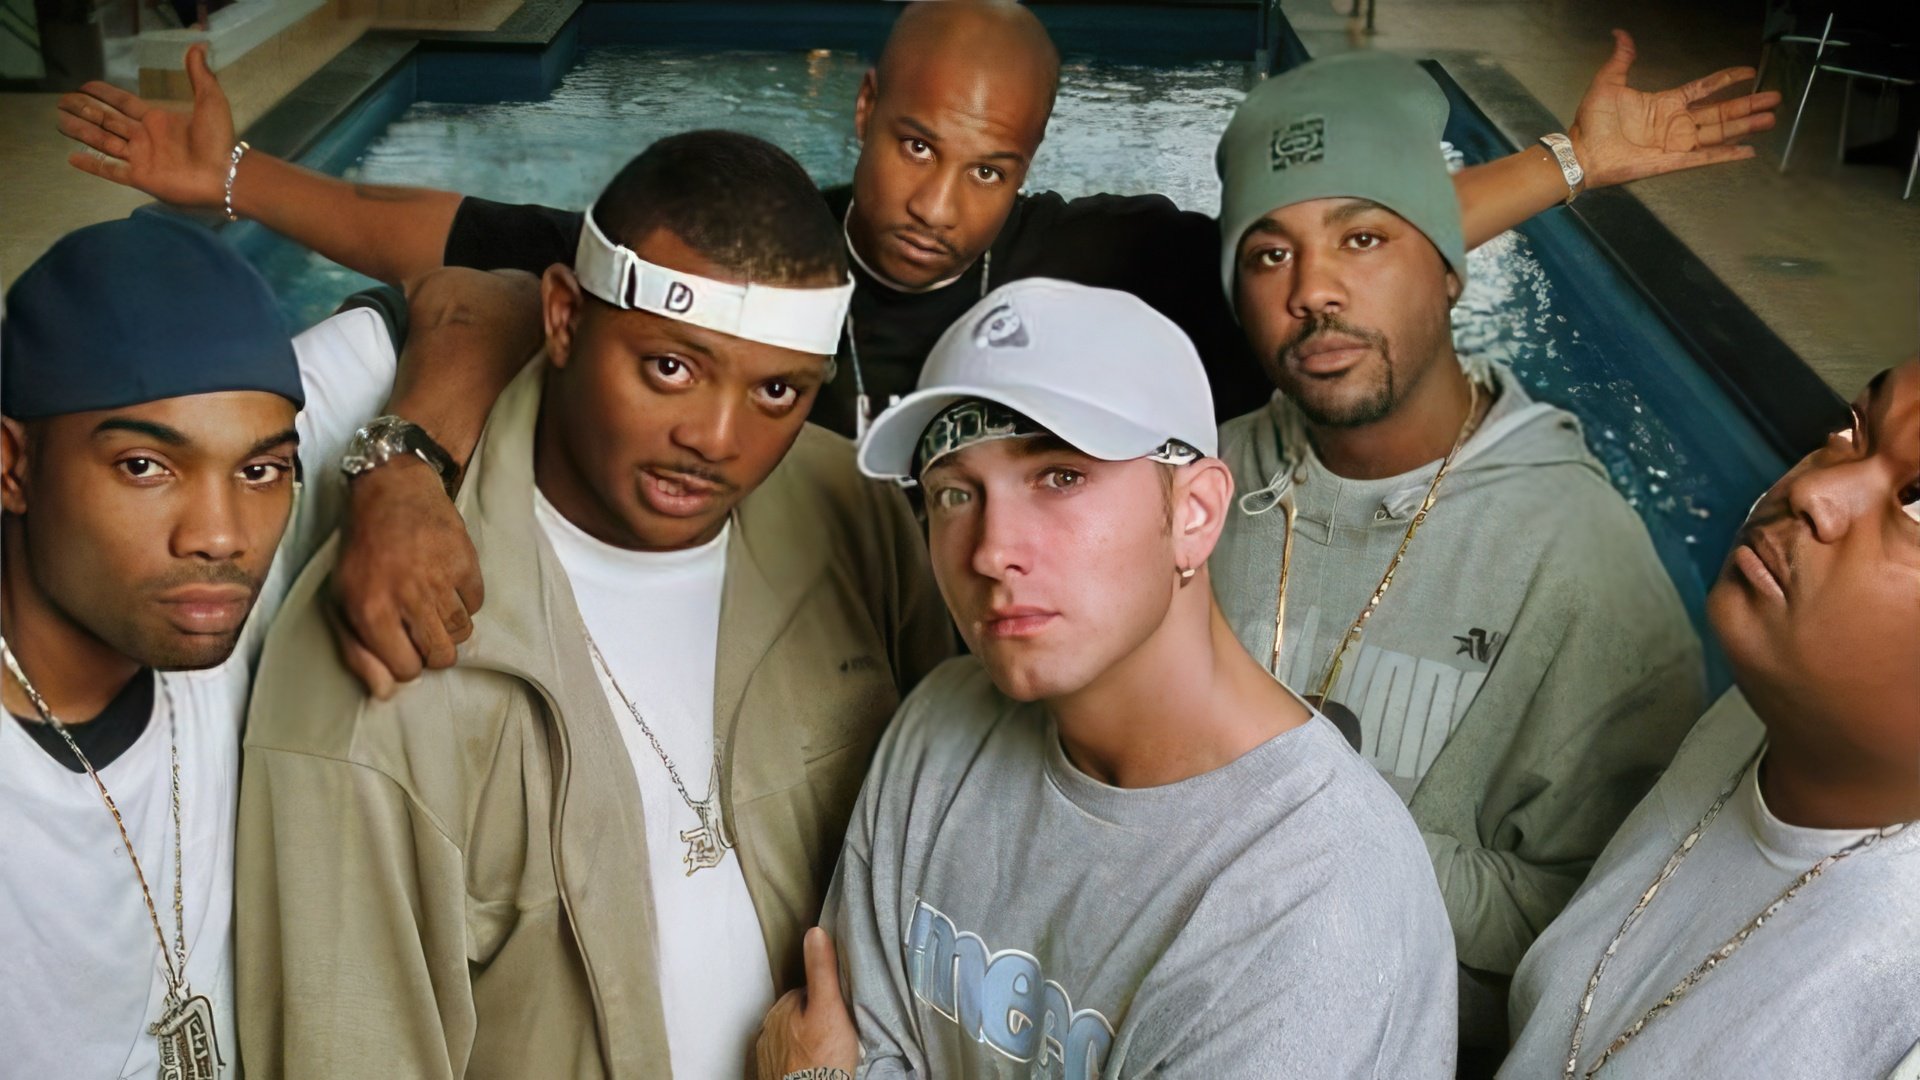 Eminem and D12